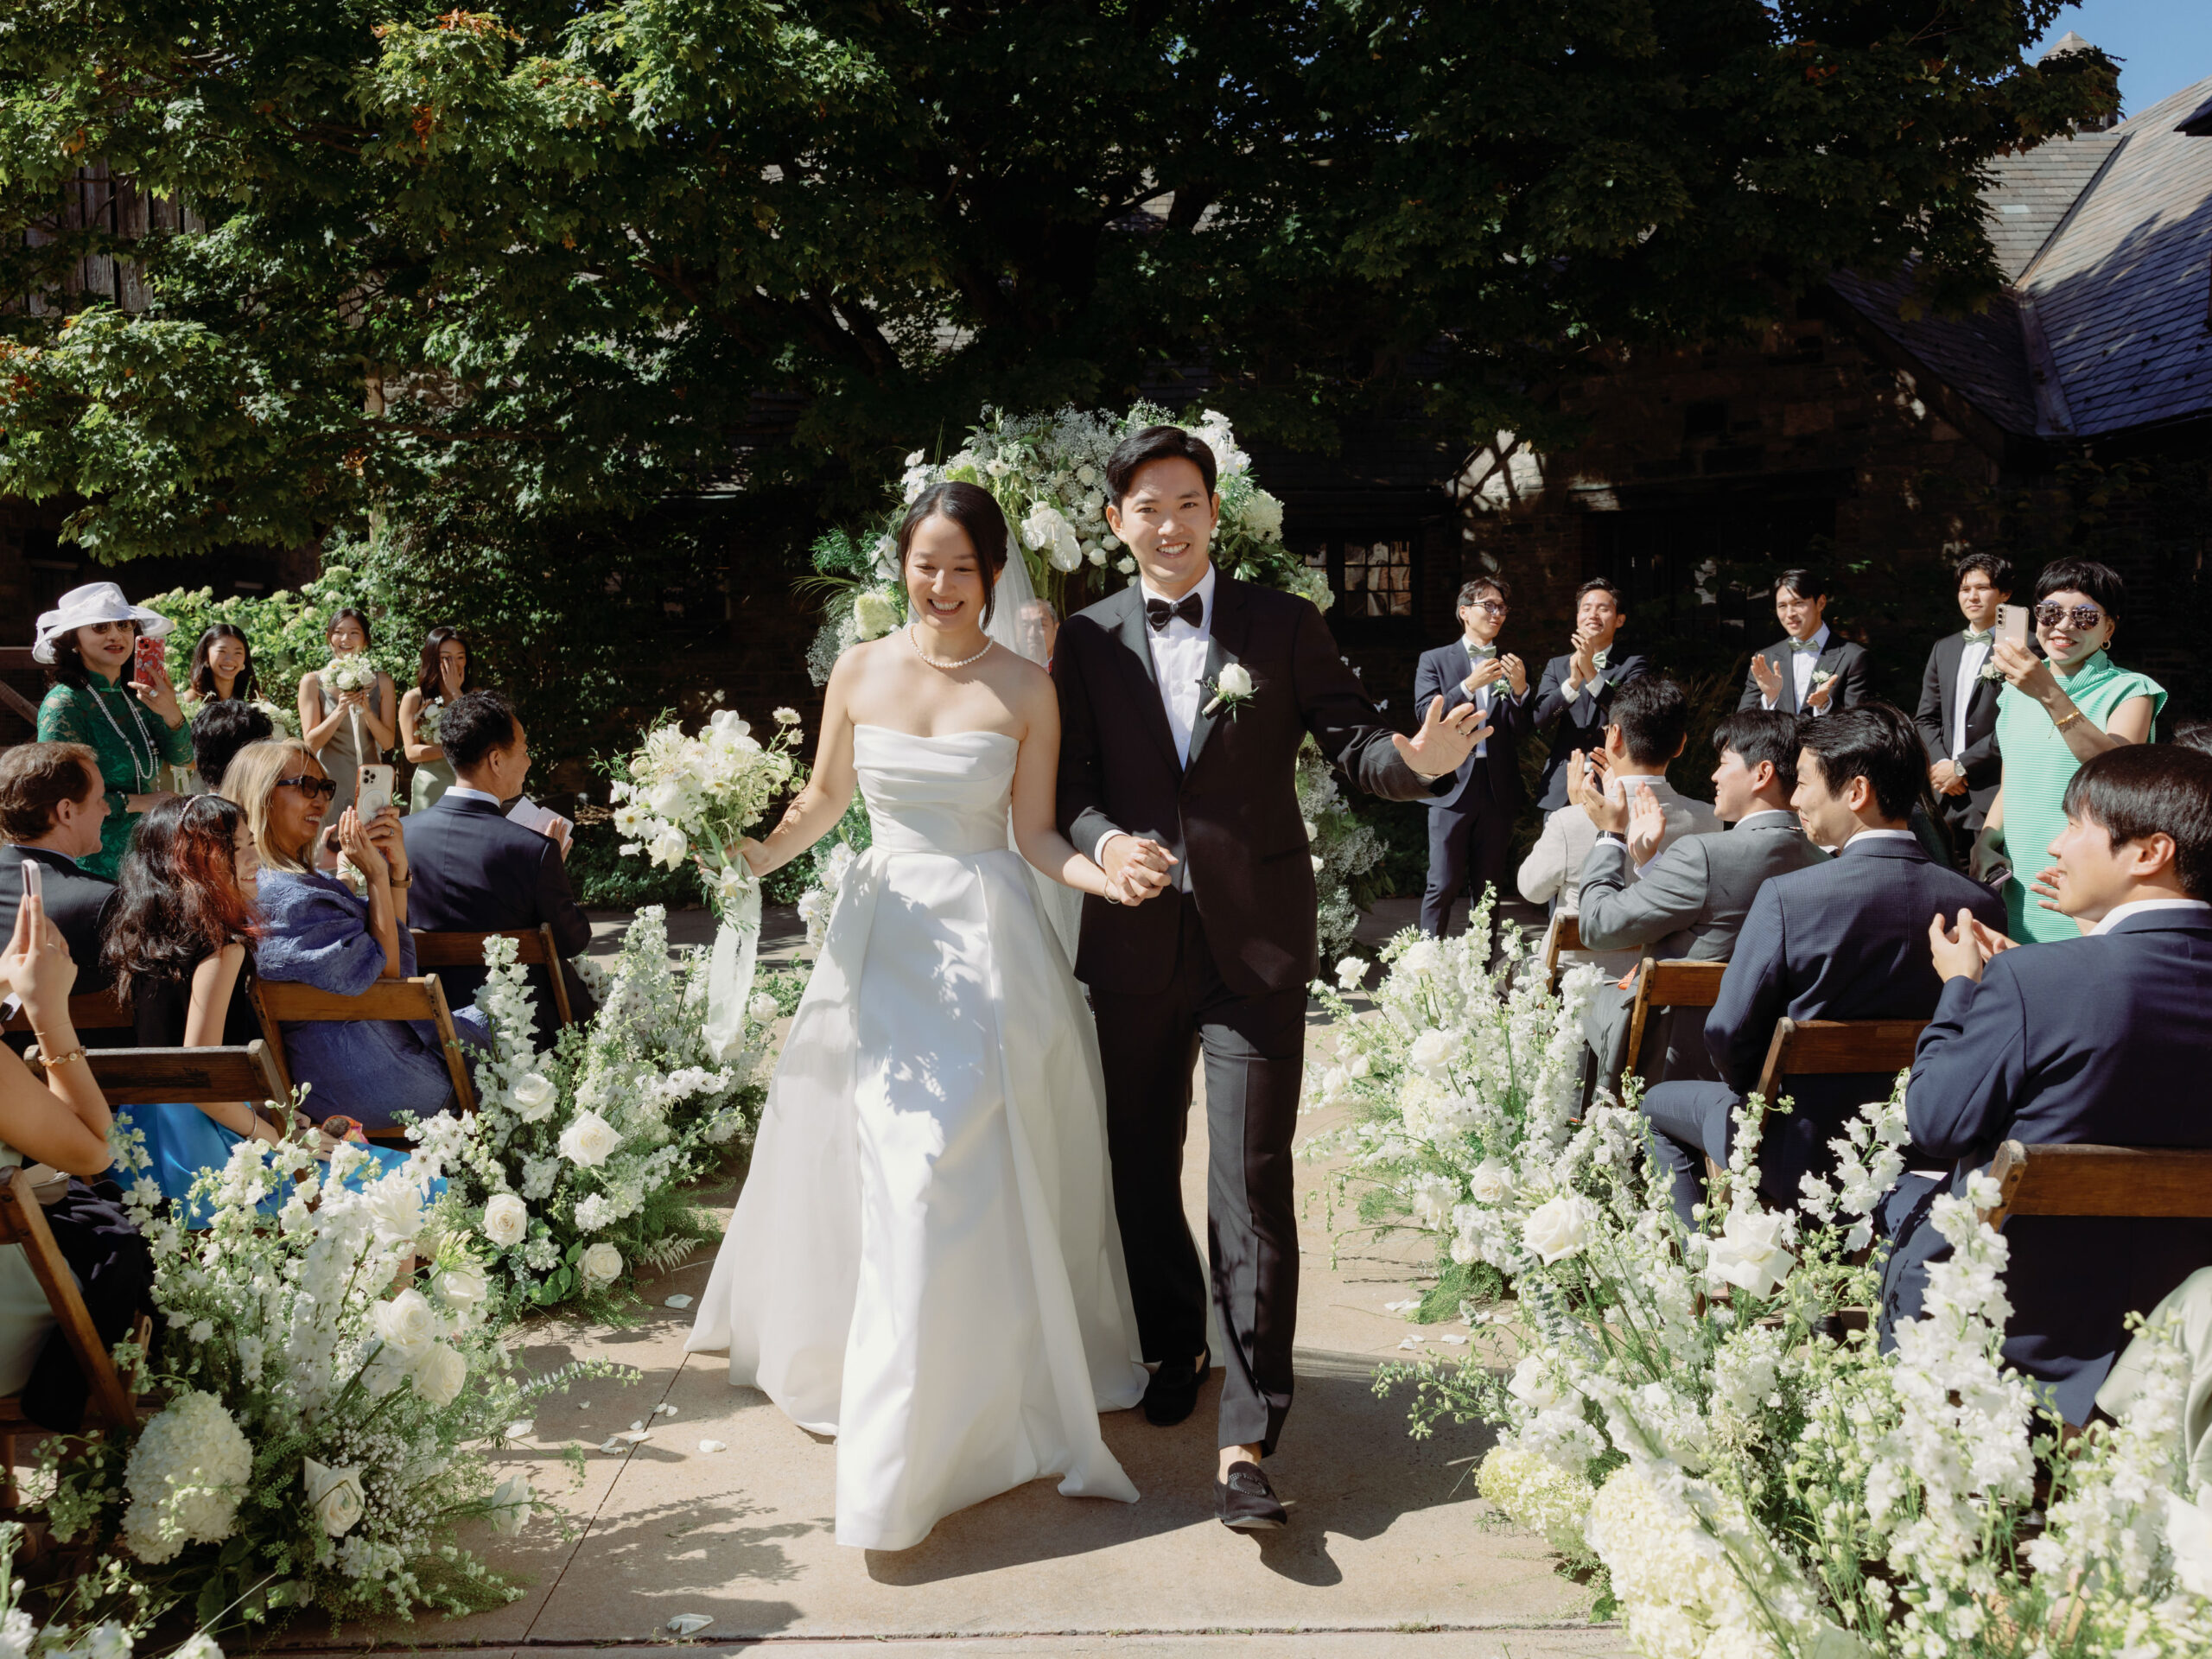 The newlyweds are happily walking back the aisle as the guests cheer on. Candid wedding photography image by Jenny Fu Studio